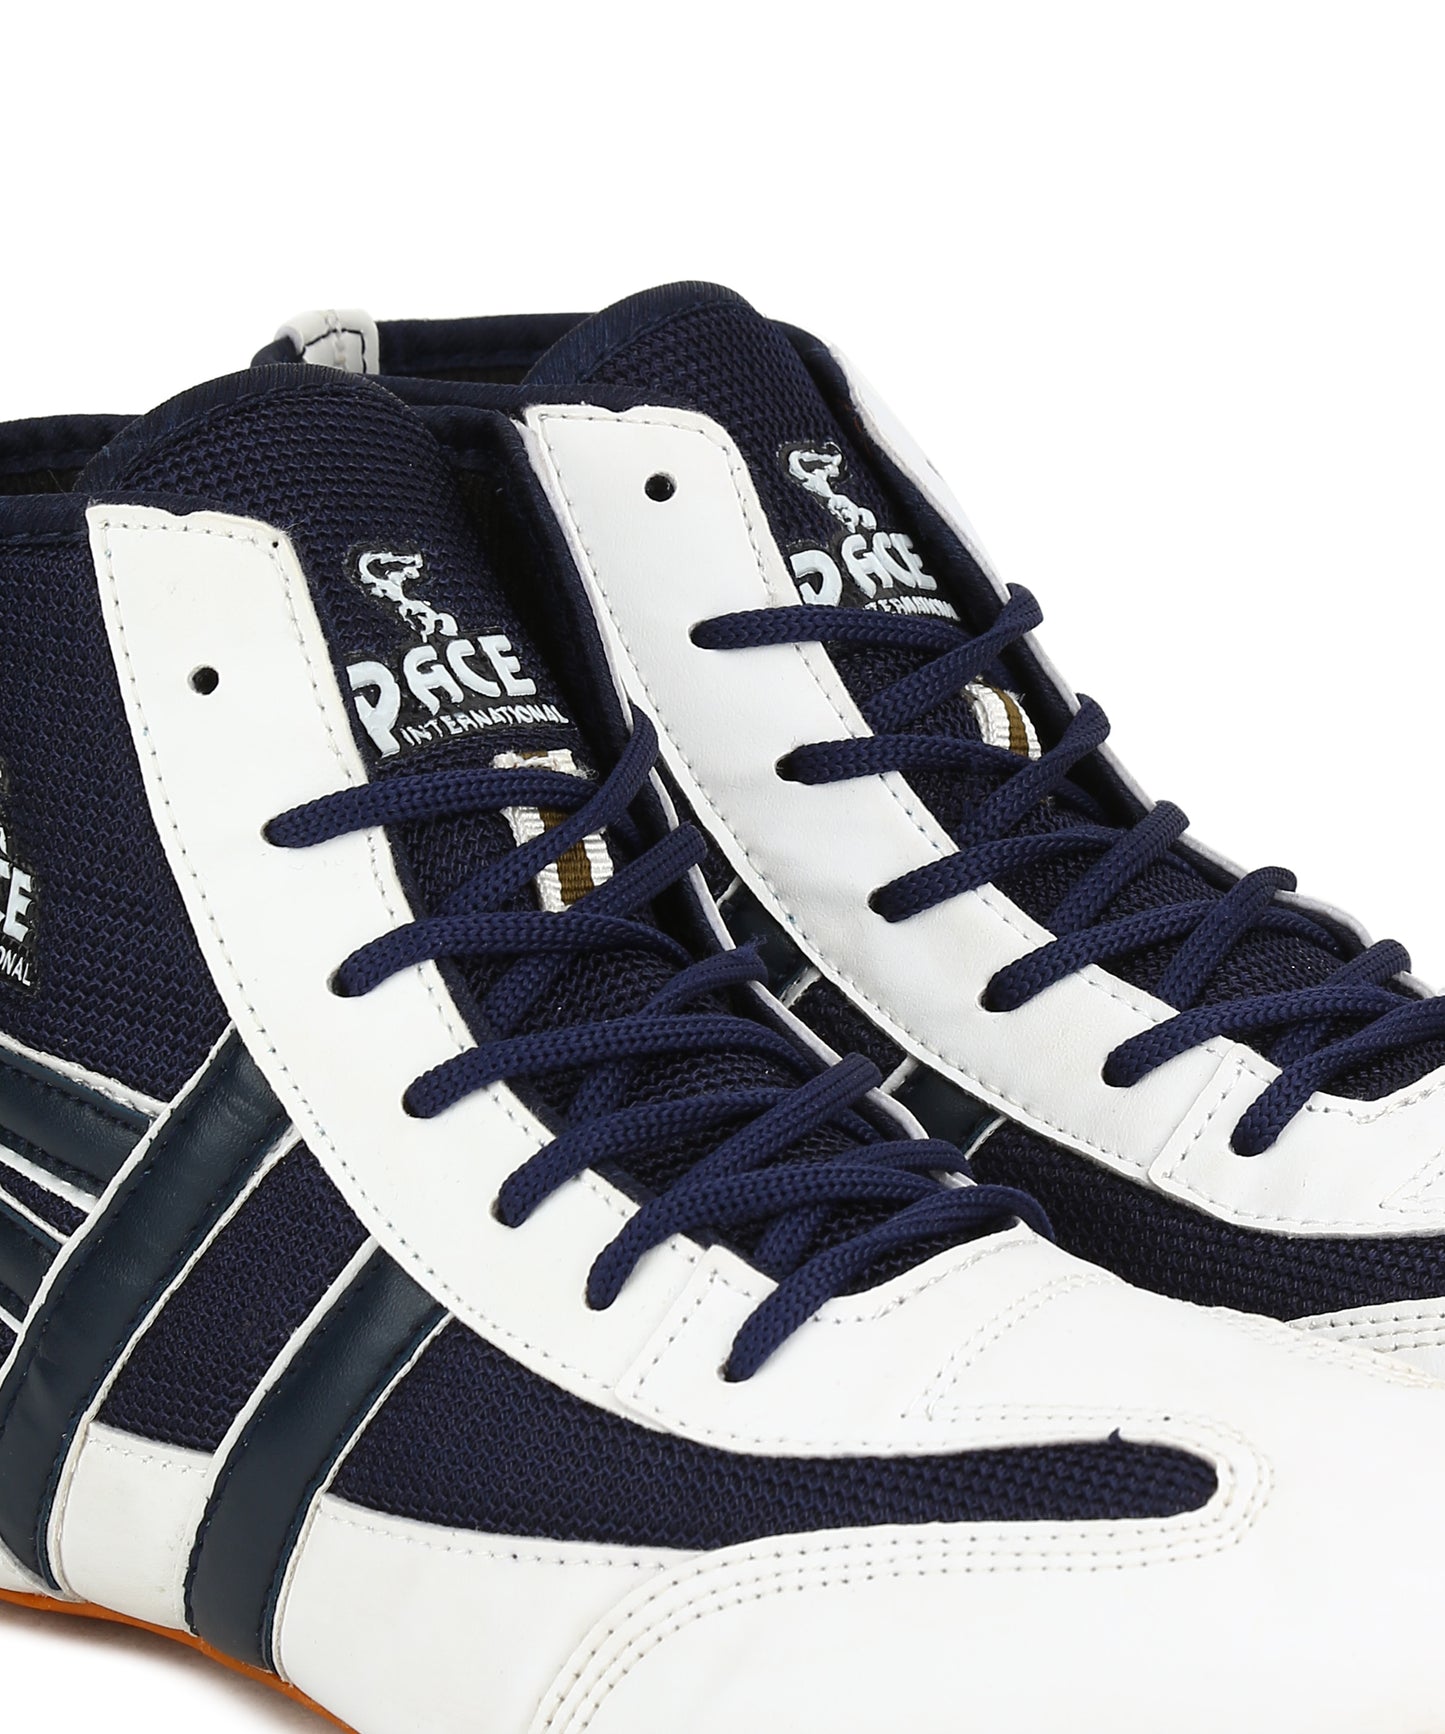 Pace International Kabaddi Shoes, Boxing Shoes, Wrestling Shoes for Men